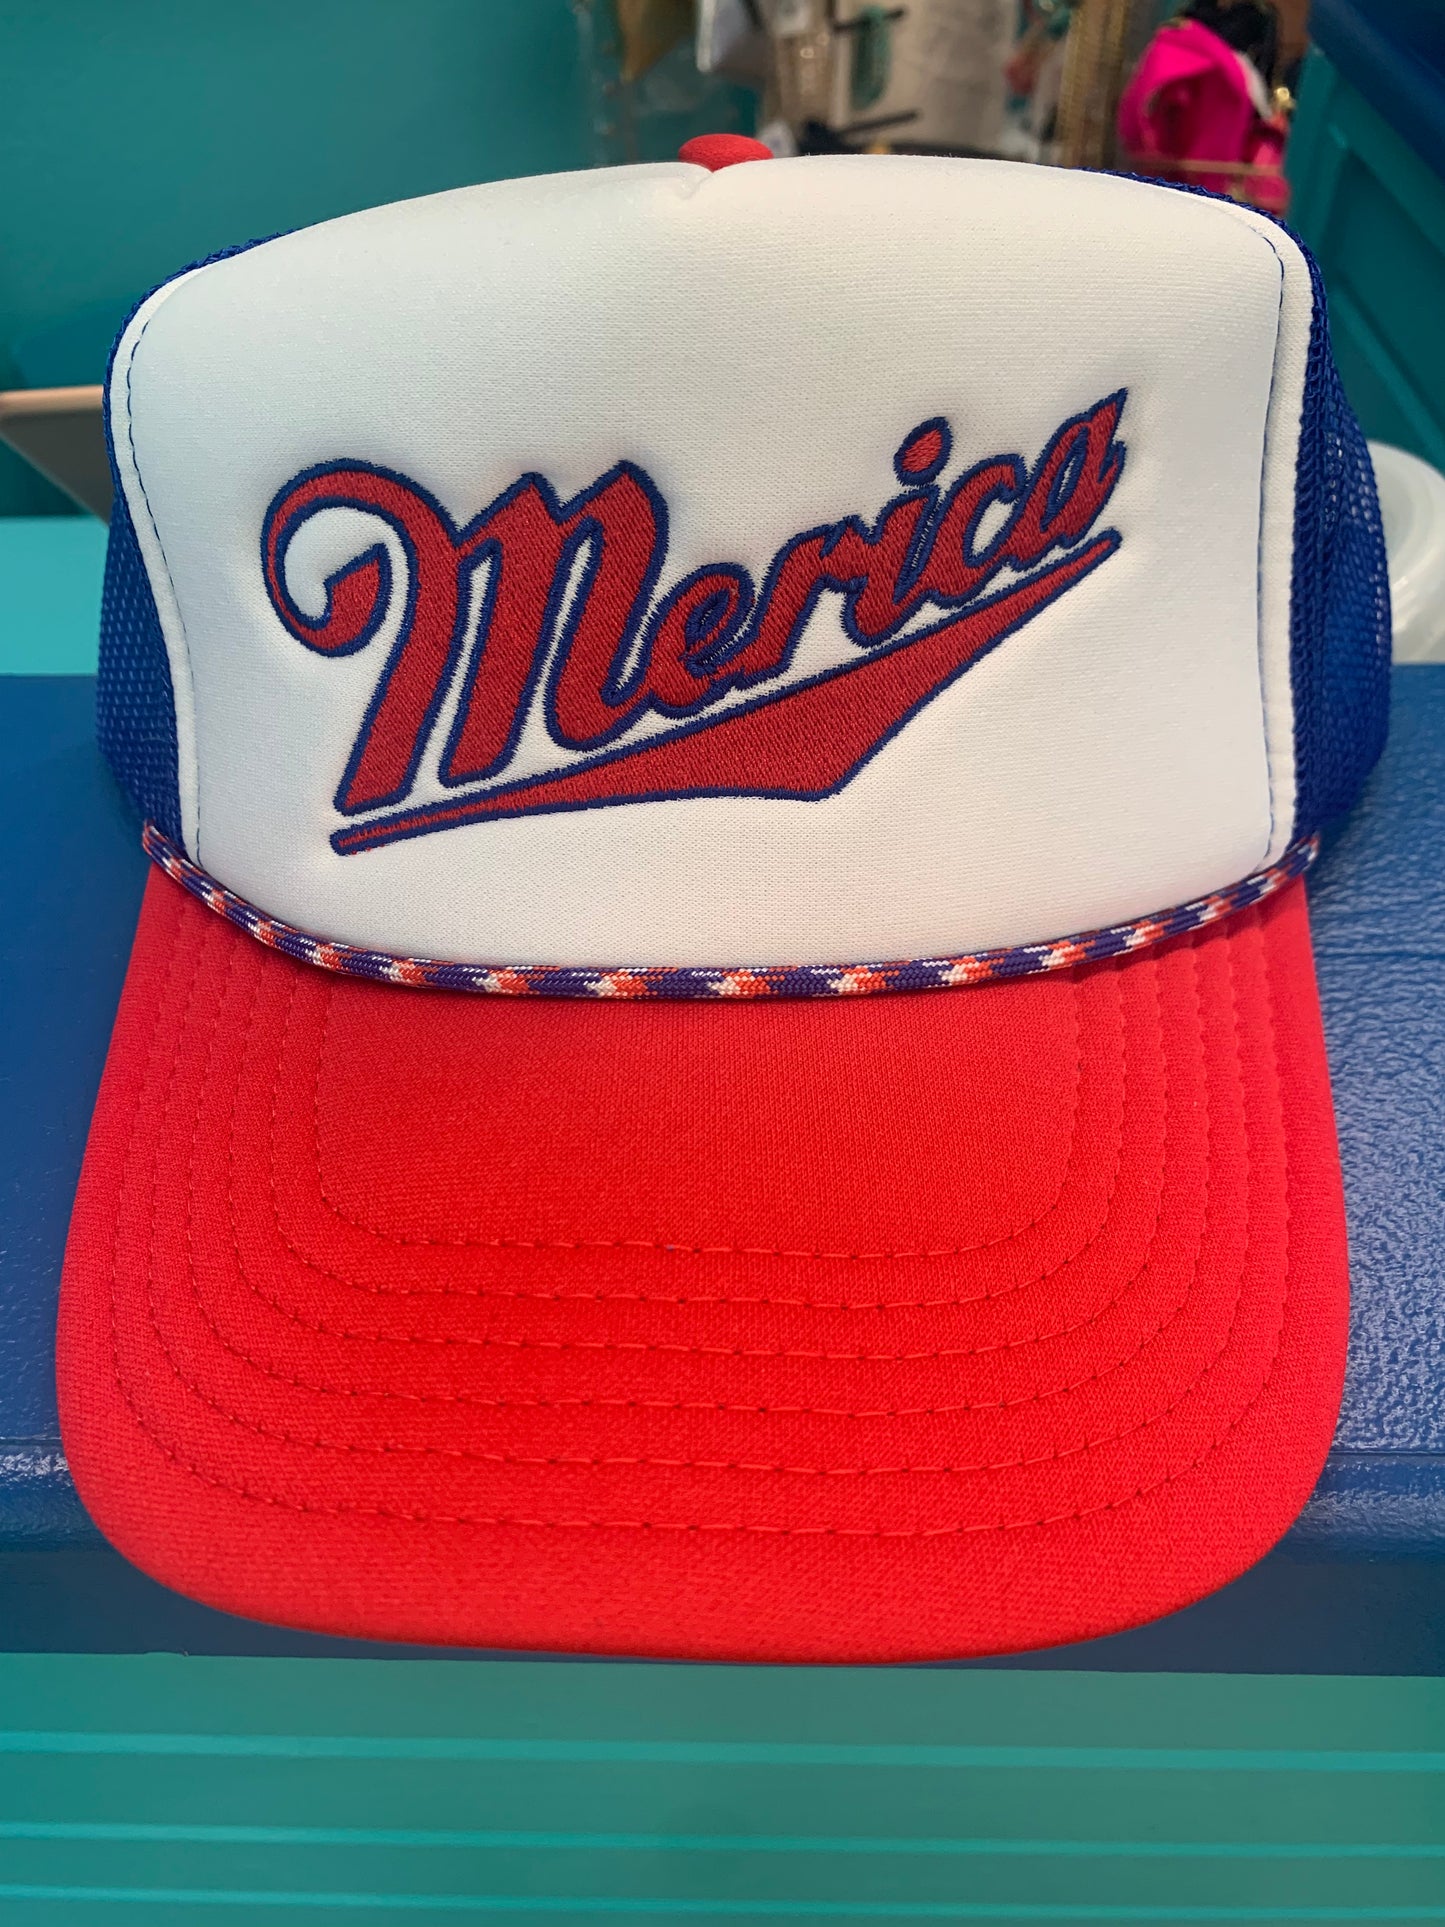 Merica Red White and Blue Trucker Hat